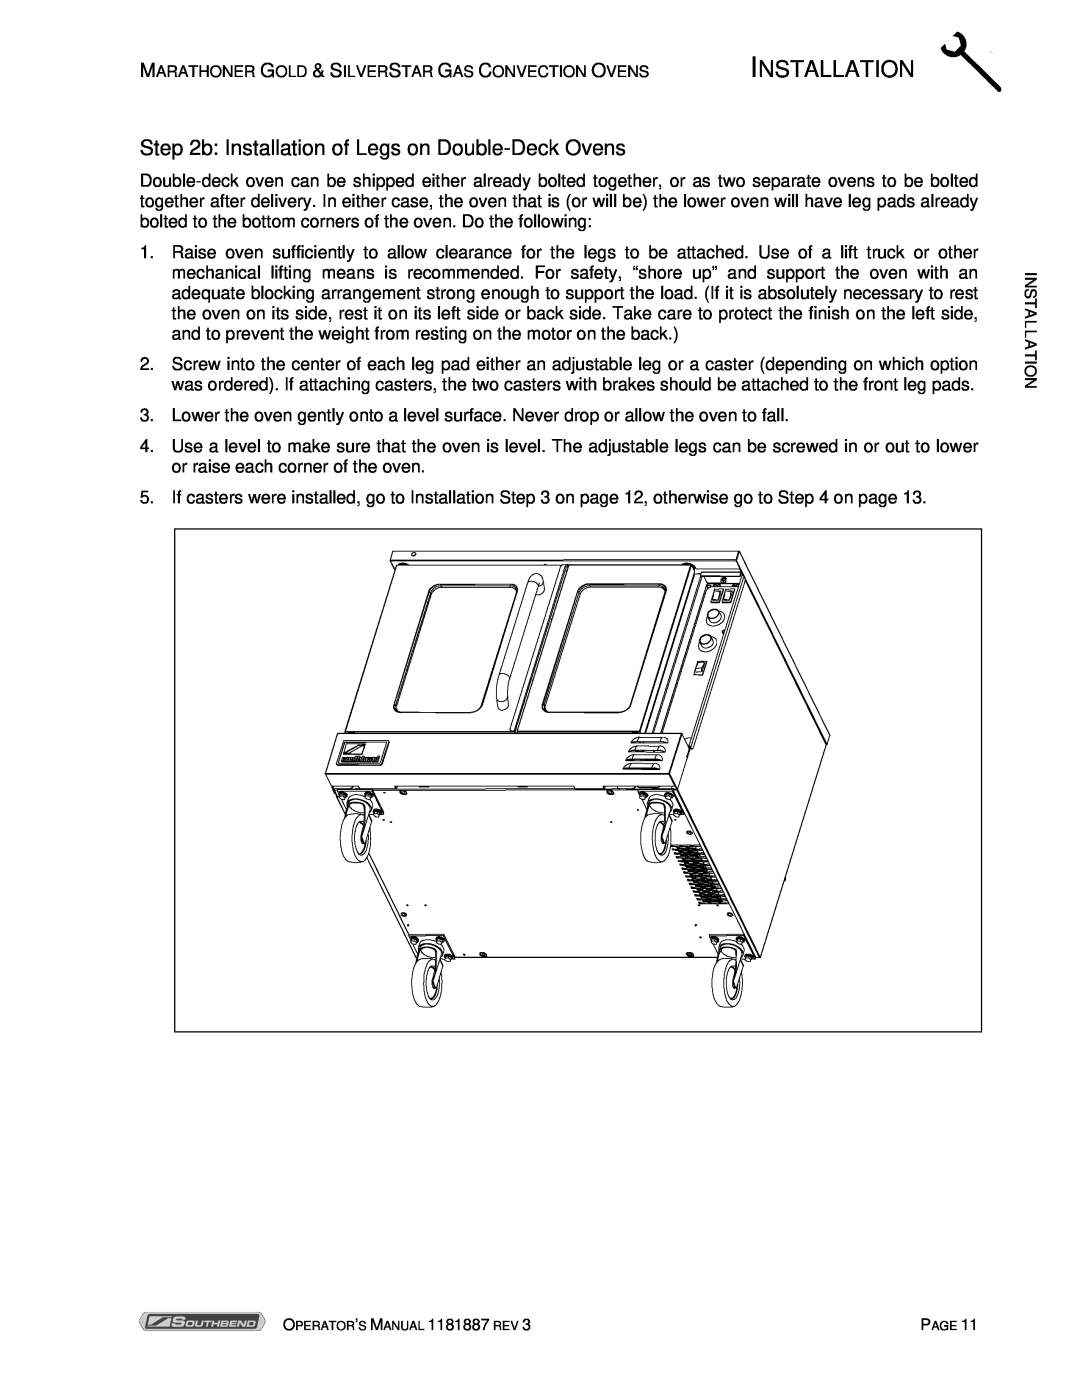 Southbend Marathoner manual b Installation of Legs on Double-Deck Ovens, Page 